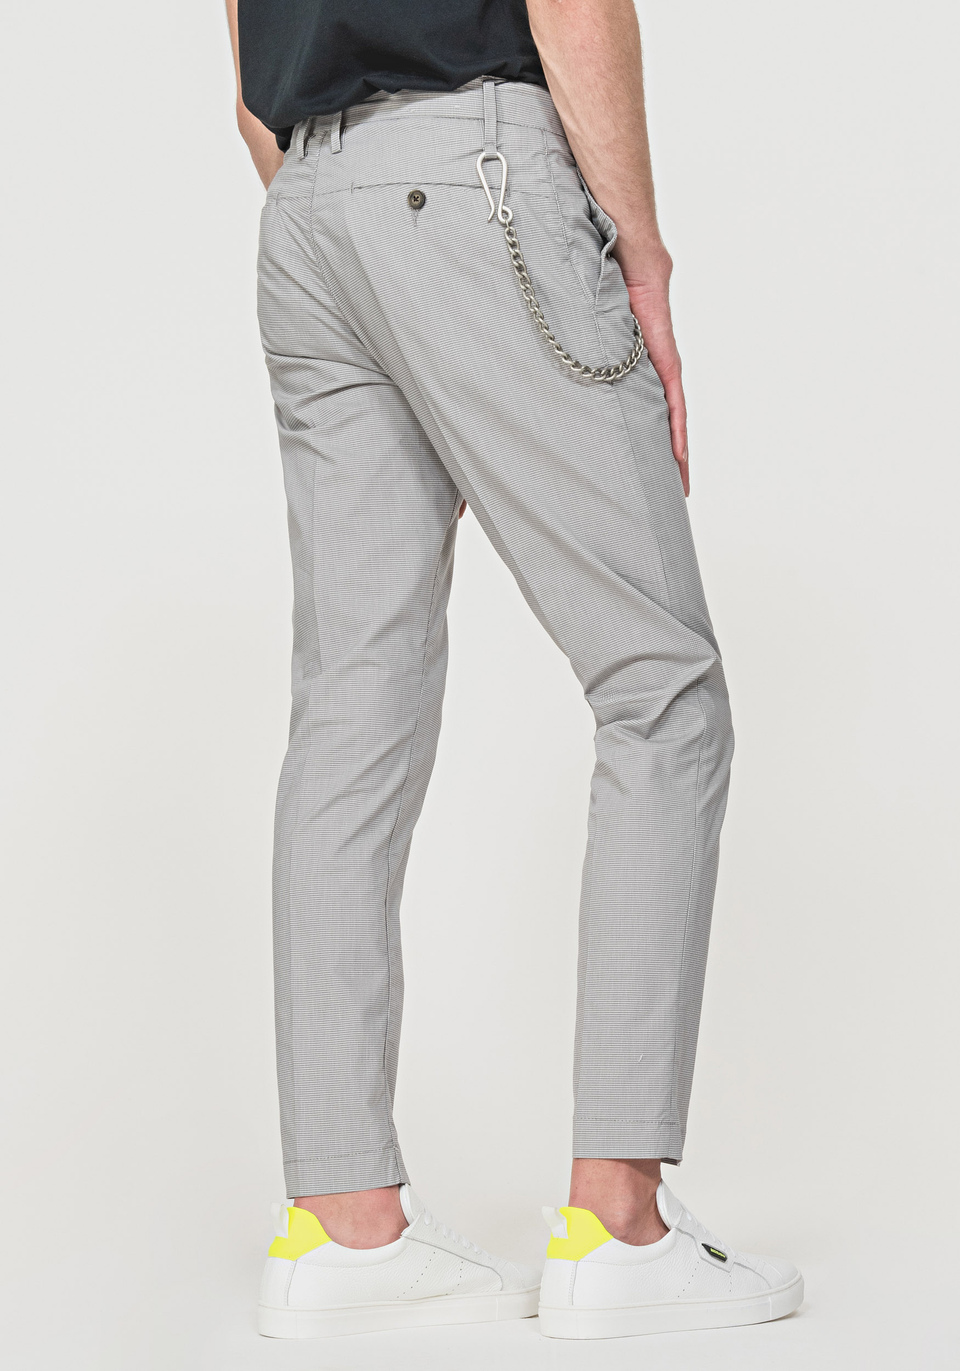 “KERR” SLIM-FIT TROUSERS IN COOL COTTON WITH A MICRO-CHECK PATTERN - Antony Morato Online Shop